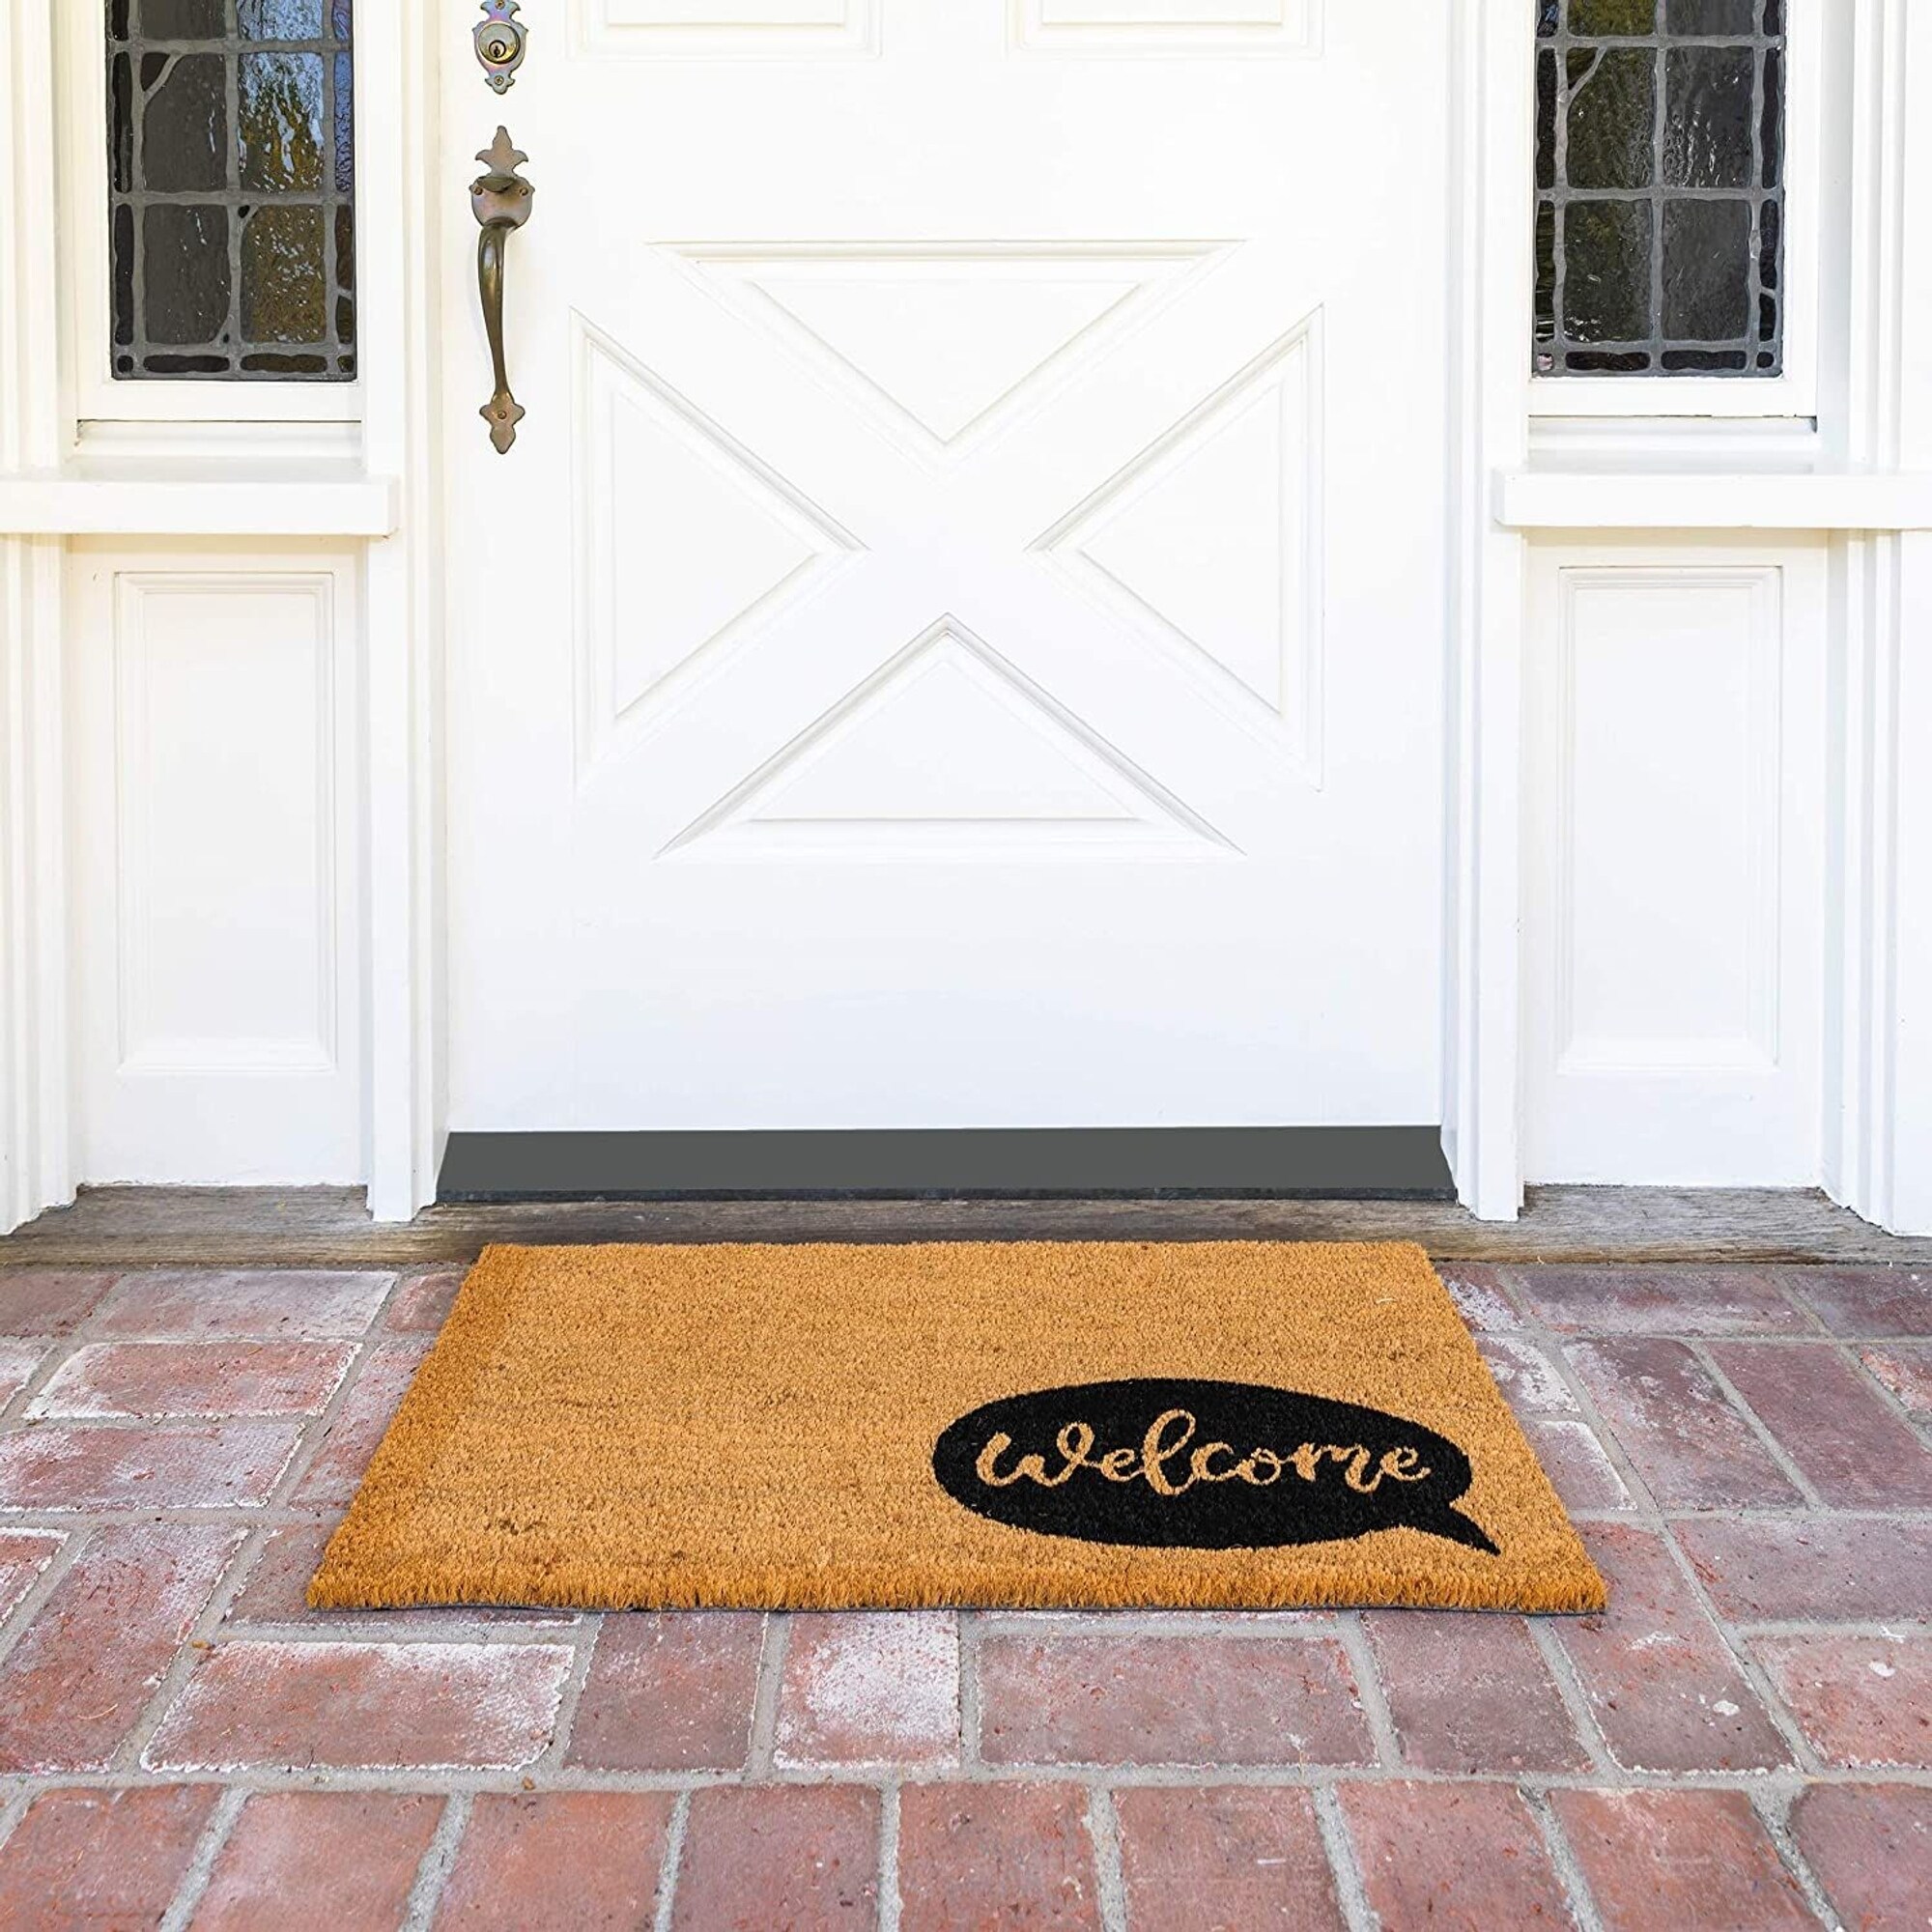 https://ak1.ostkcdn.com/images/products/is/images/direct/c6d0b3f8535ac181752ad56bb7030d9b5980db92/Natural-Coir-Welcome-Doormat-with-Speech-Bubble-%2817-x-30-Inches%29.jpg